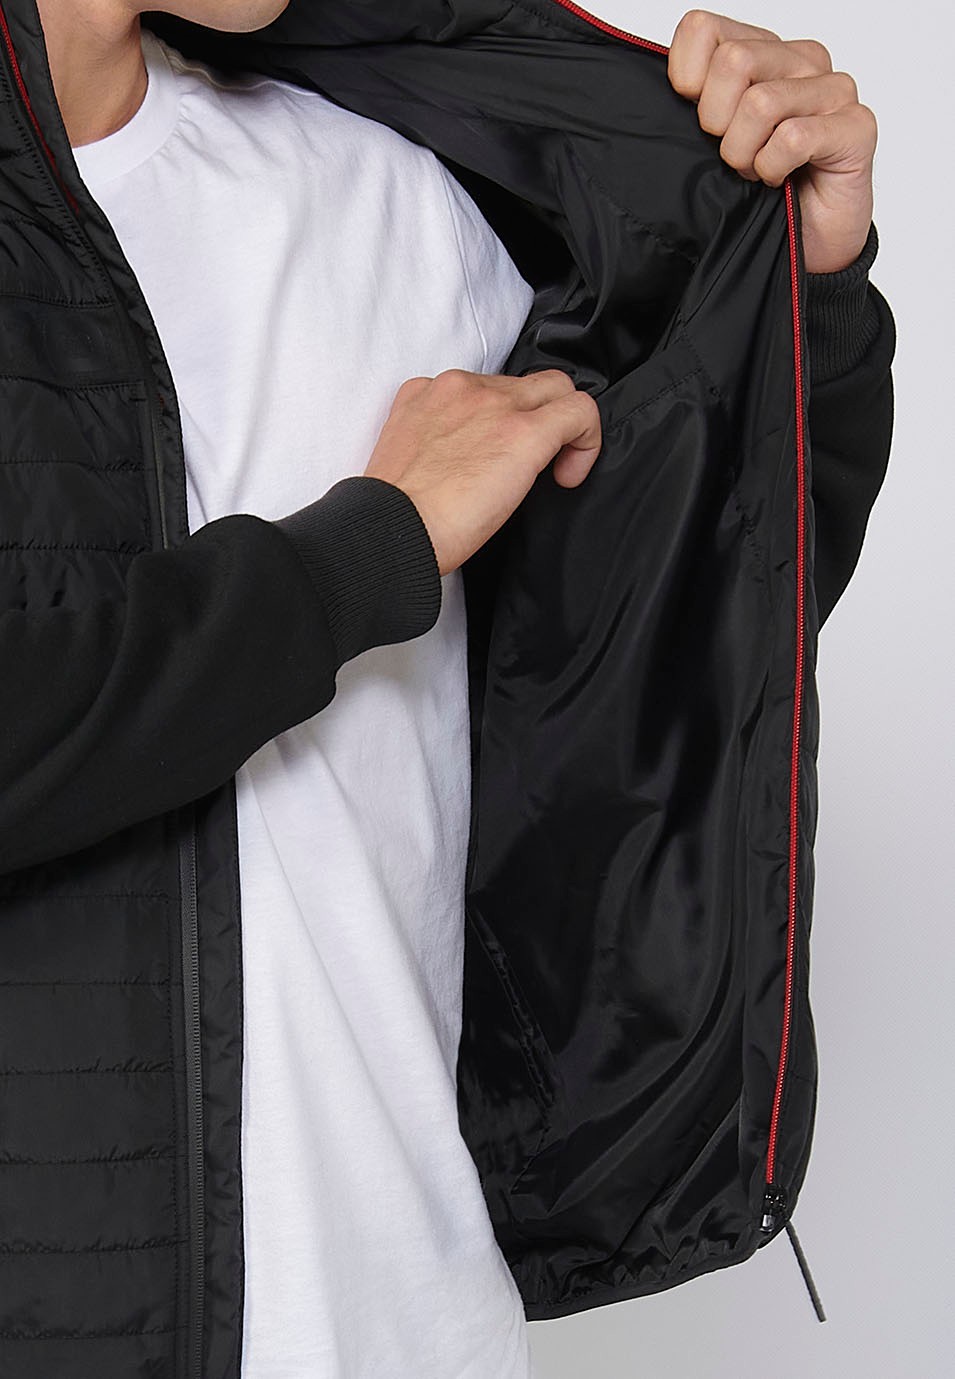 Long-sleeved Jacket with Round Neck and Front Zipper Closure with Front Details in Black for Men